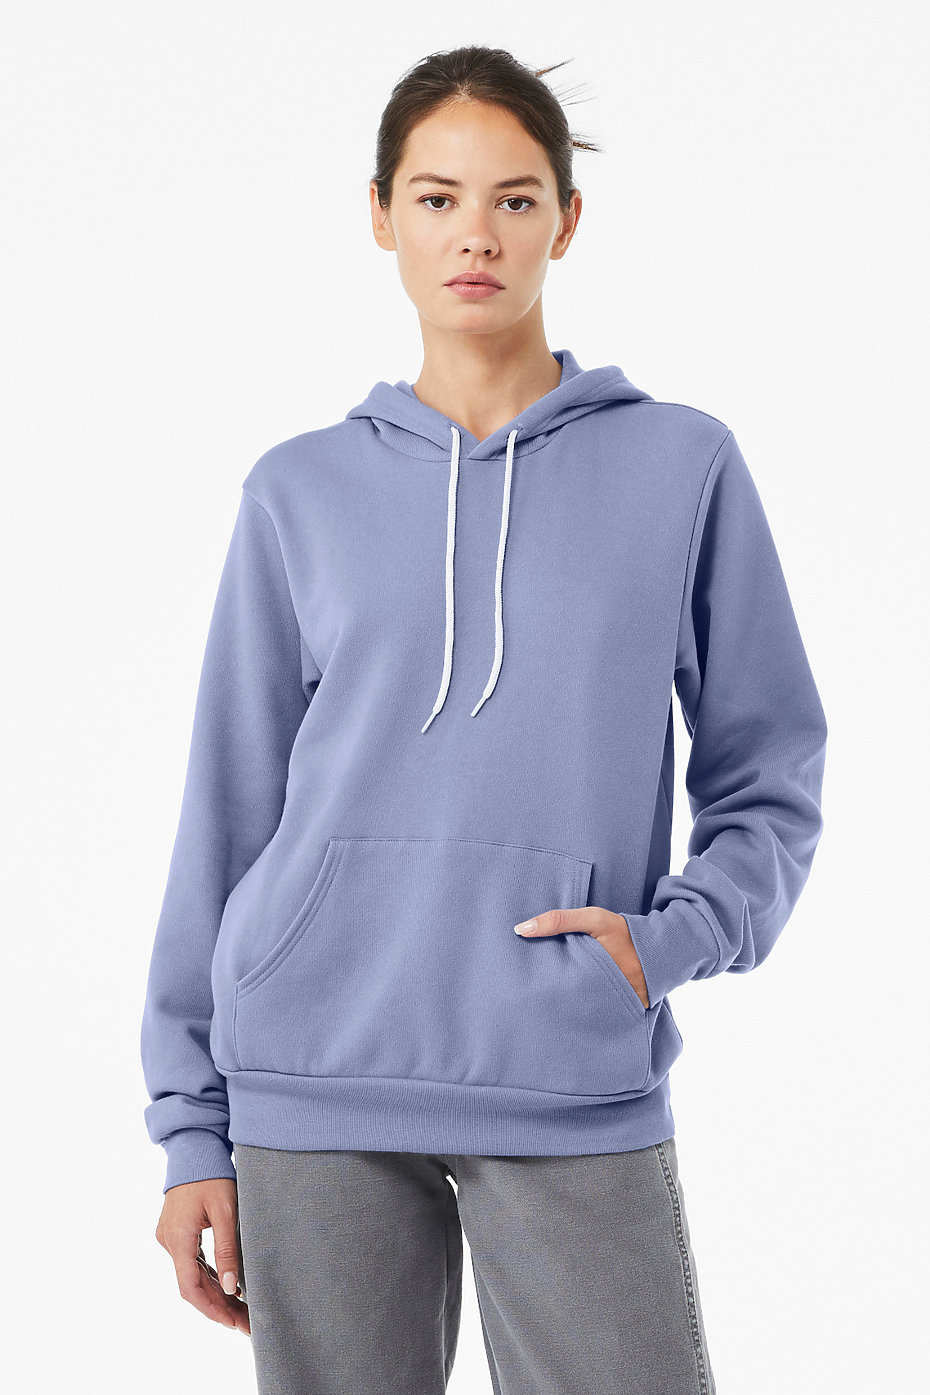 Lucky Brand Drawstring Athletic Hoodies for Women